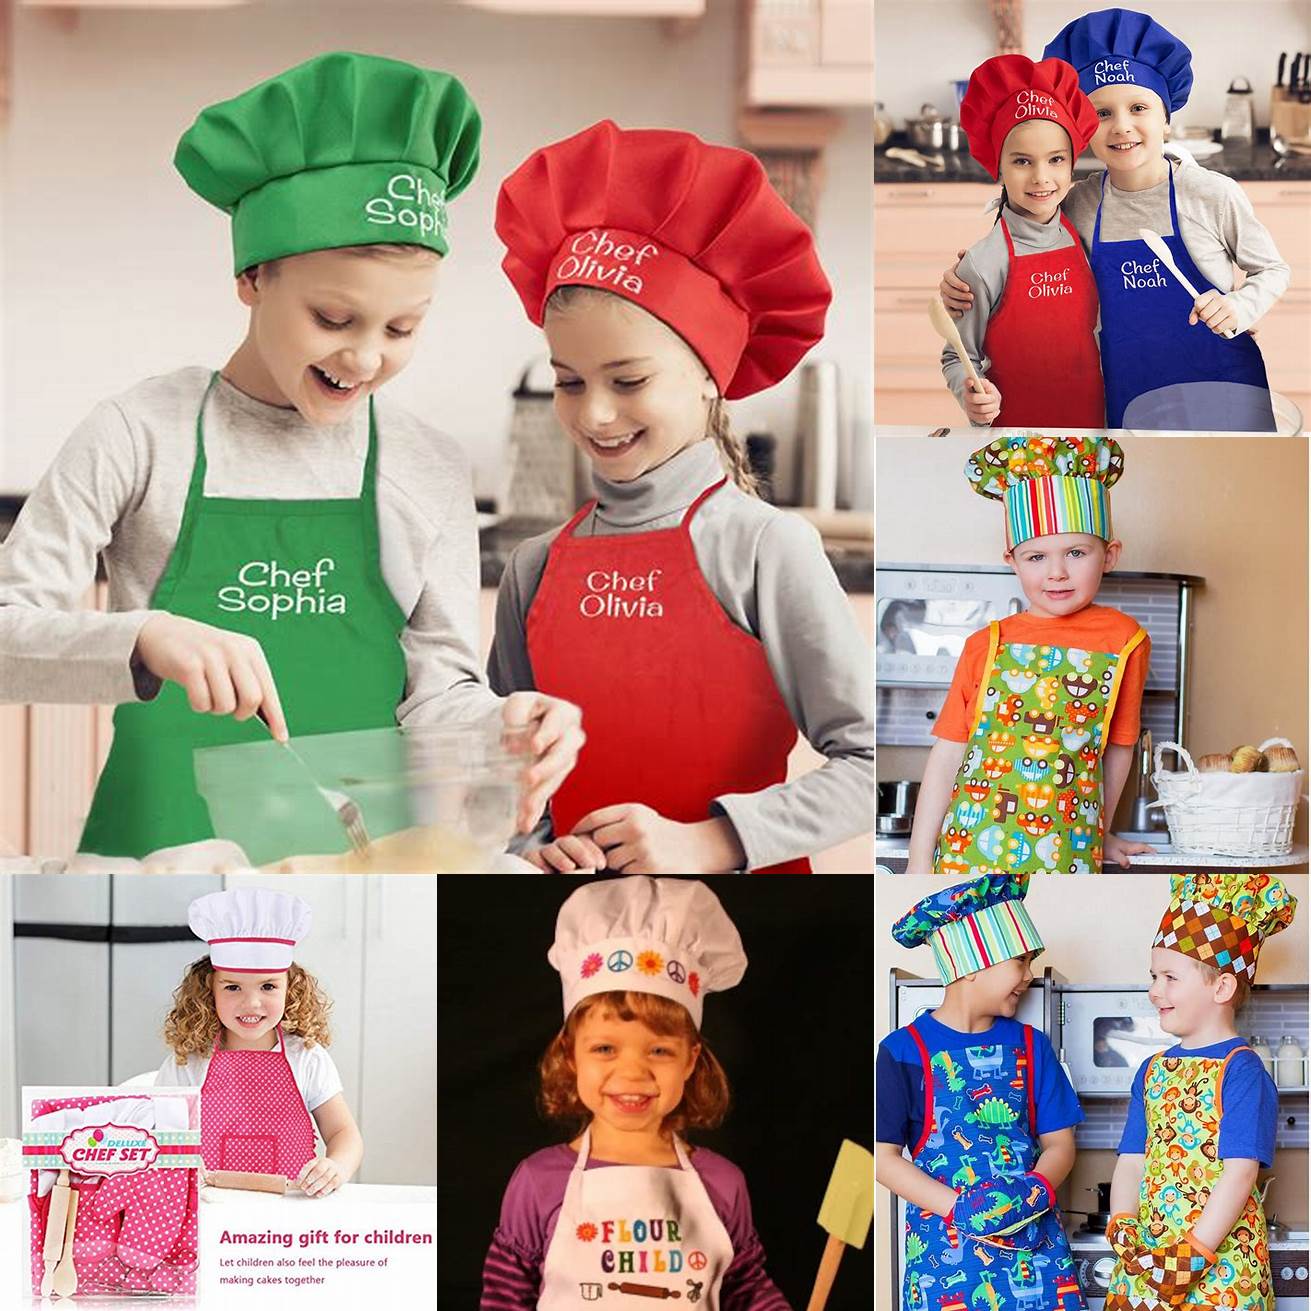 Cooking with aprons and chef hats